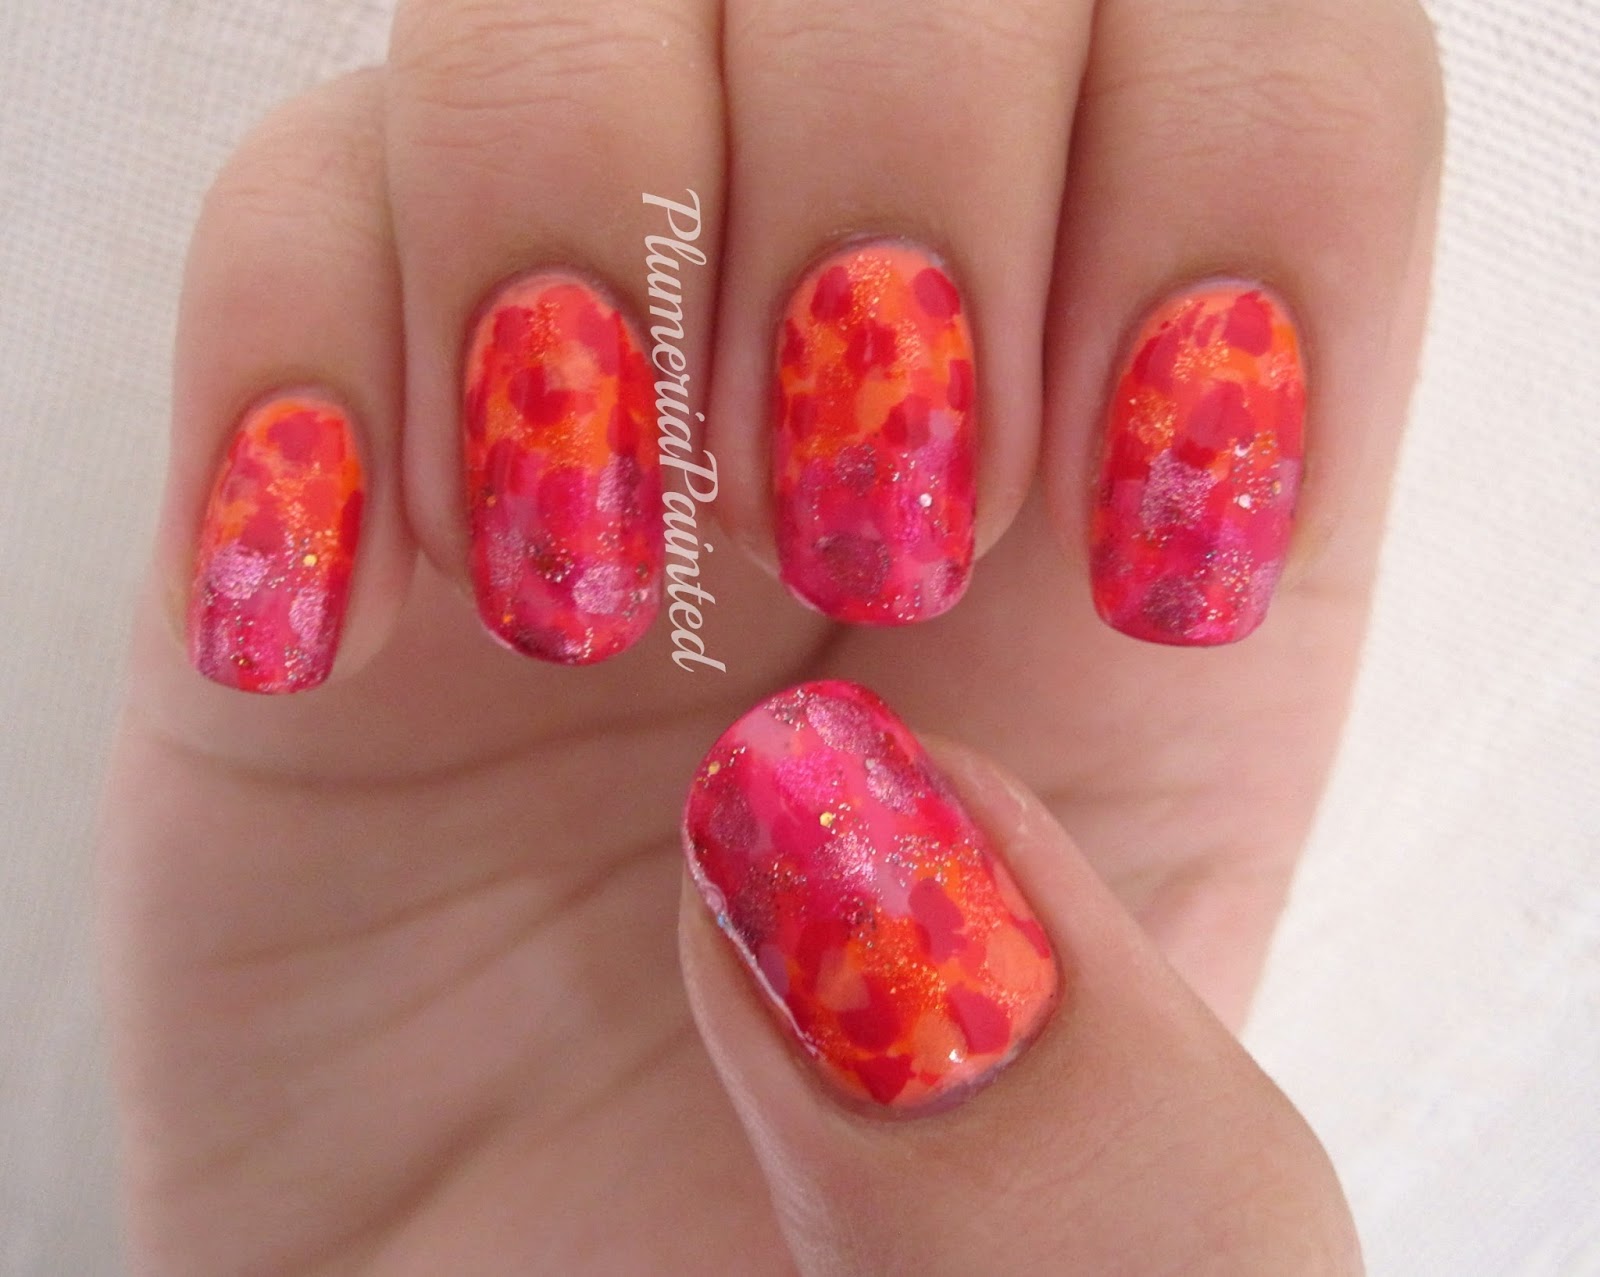 6. Fish Scale Nail Art - wide 5